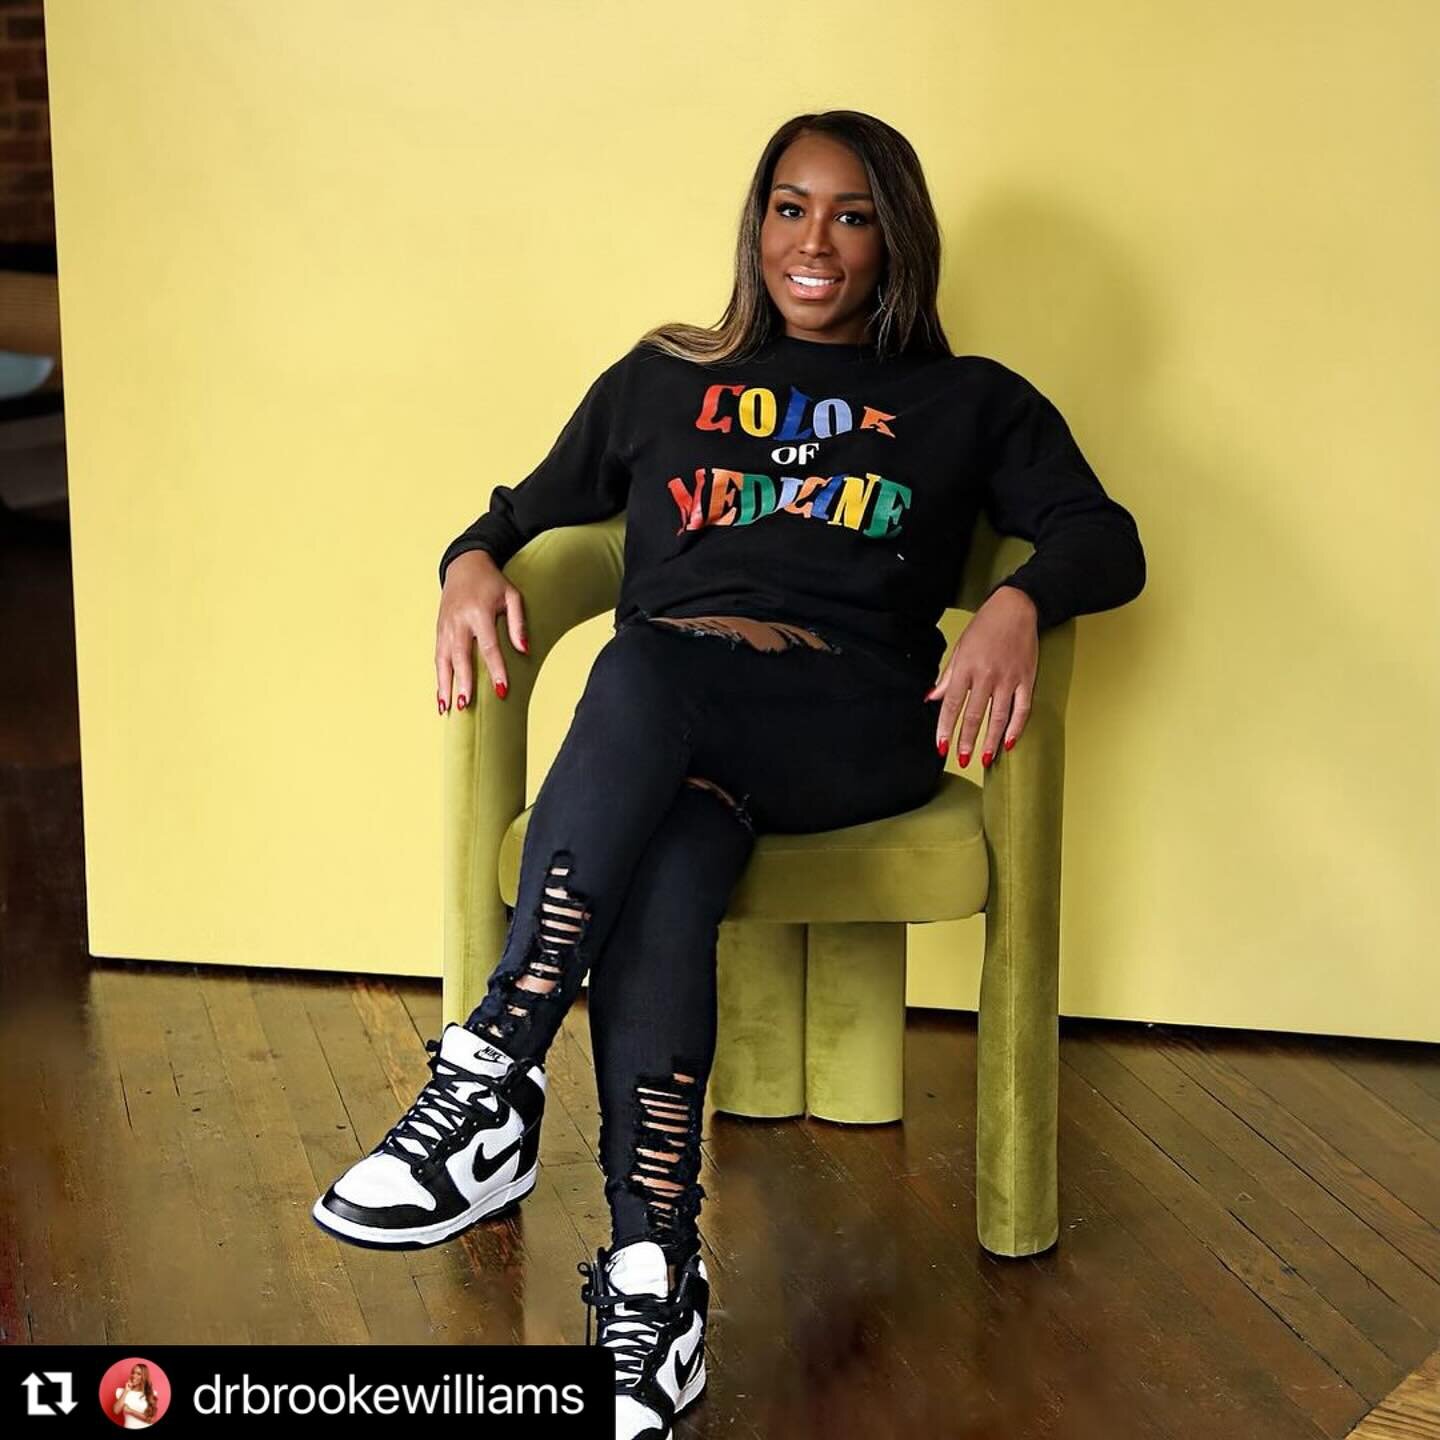 #Repost from one of our co-founders @drbrookewilliams 
・・・
Allow me to reintroduce myself - I see I&rsquo;ve gained a lot of new followers within the last few months! HEY, HEY 👋🏾 
I AM Dr. Brooke Williams.
You can find me somewhere in between: 
✨ W